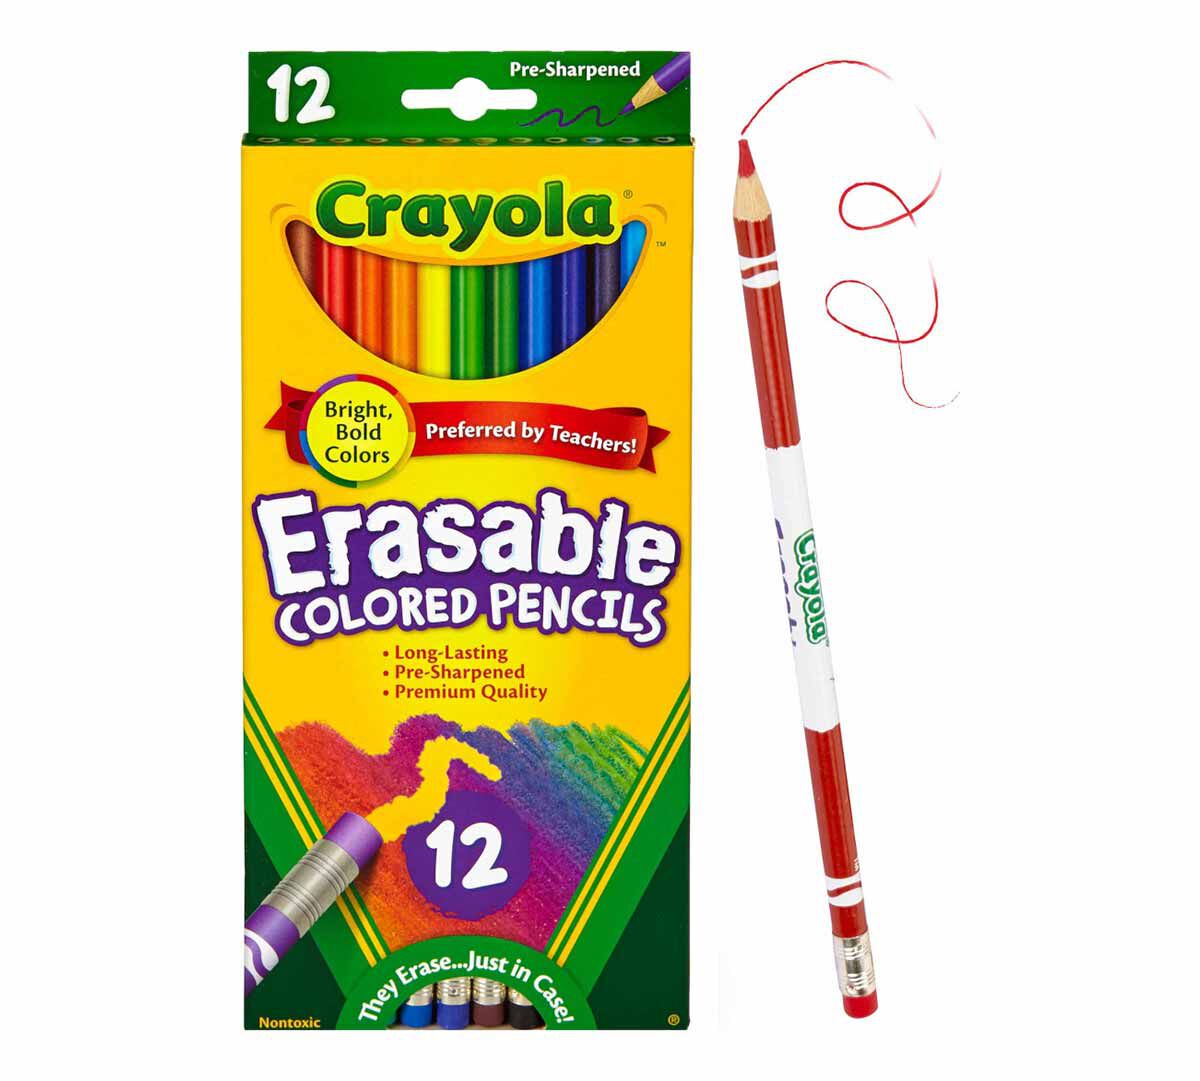 Pre-Sharpened Pencils in a Crayola Storage Tray Non-Toxic Pencils Made to Share Great for Classrooms 54 Premium Quality Long-Lasting Crayola Colored Pencils 6 Sets of 9 Classic Crayola Colors 